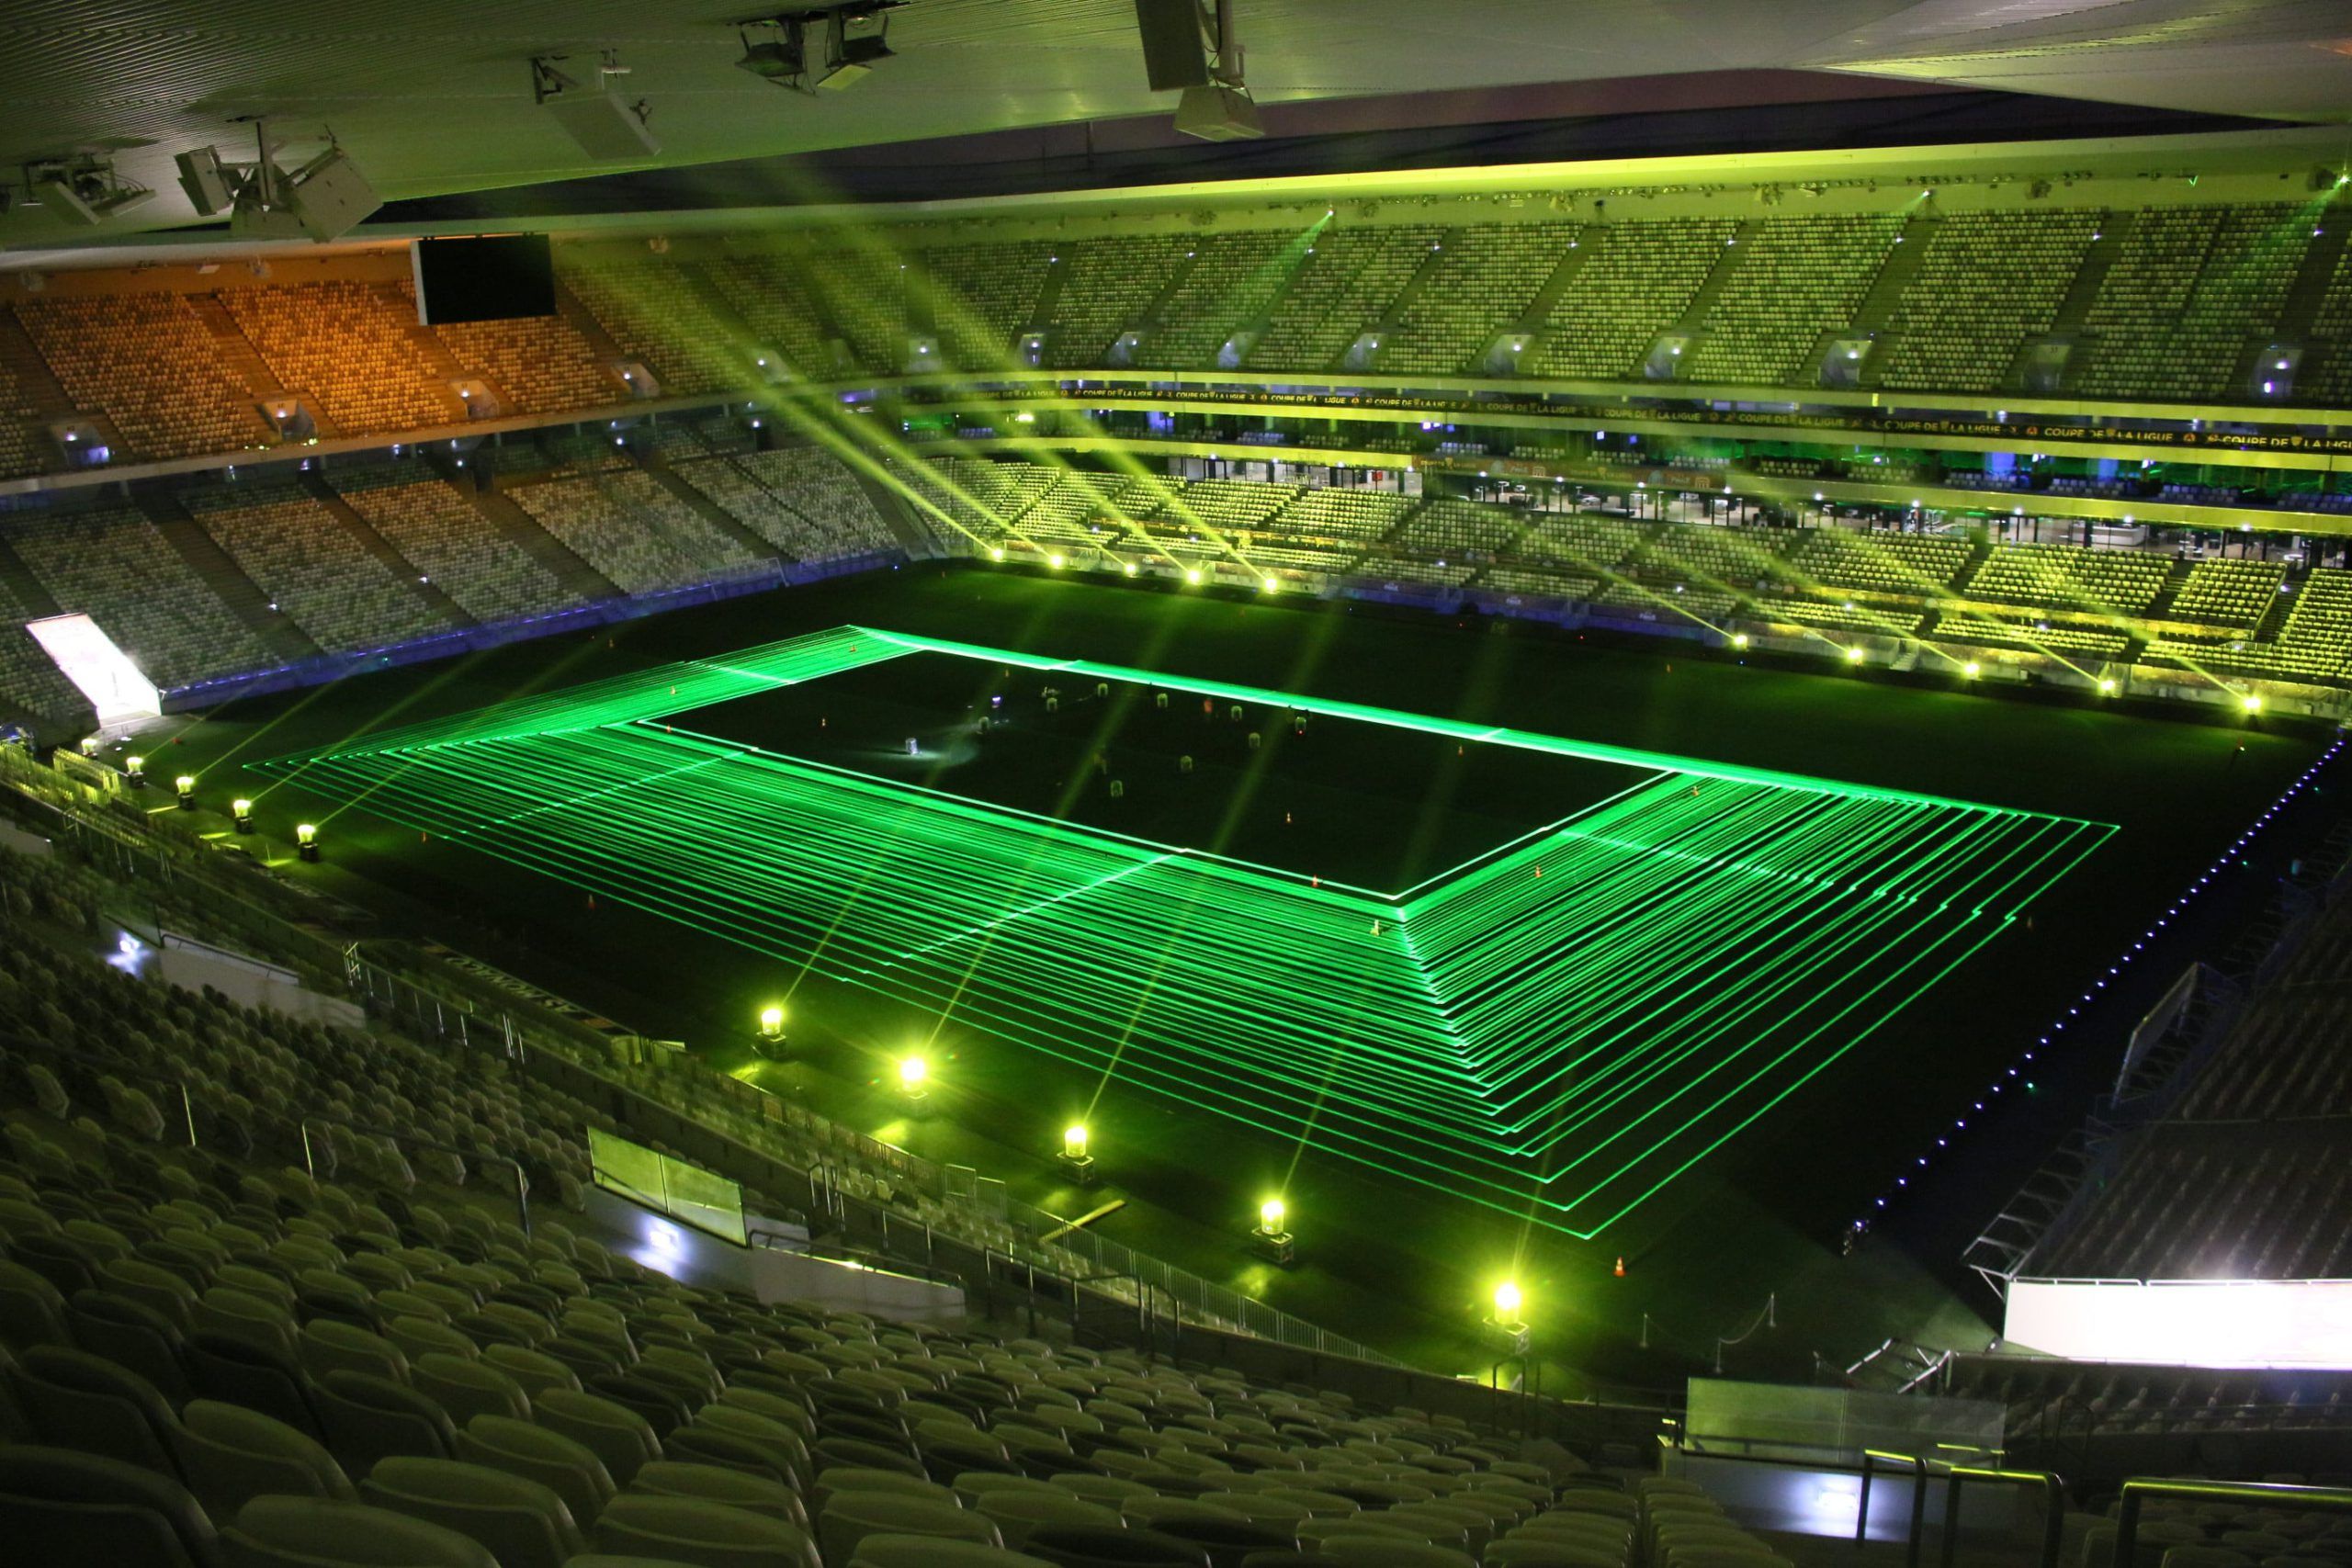 Photo of a stadium with green lines projected in the center